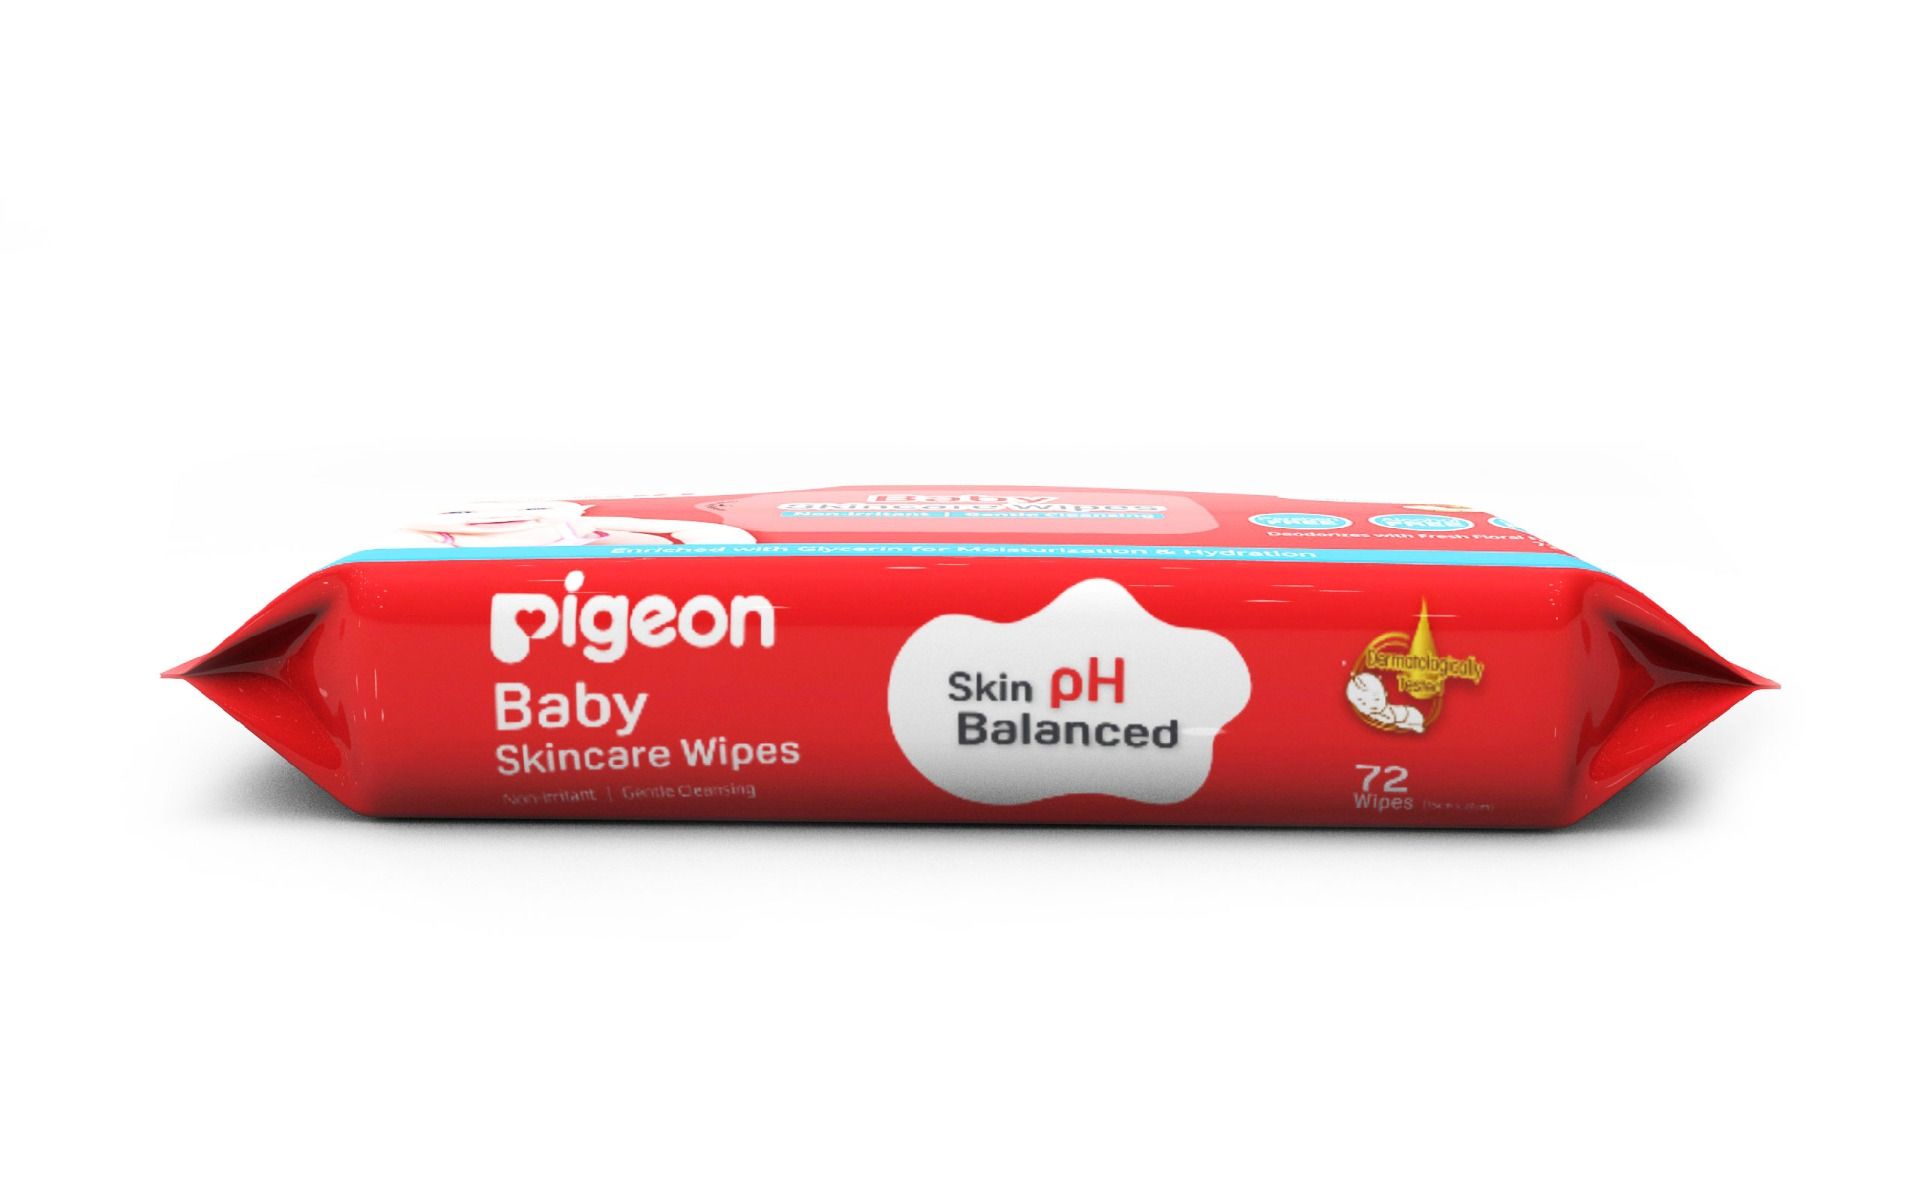 Pigeon Baby Skincare Wipes, 72 Count, Pack of 1 